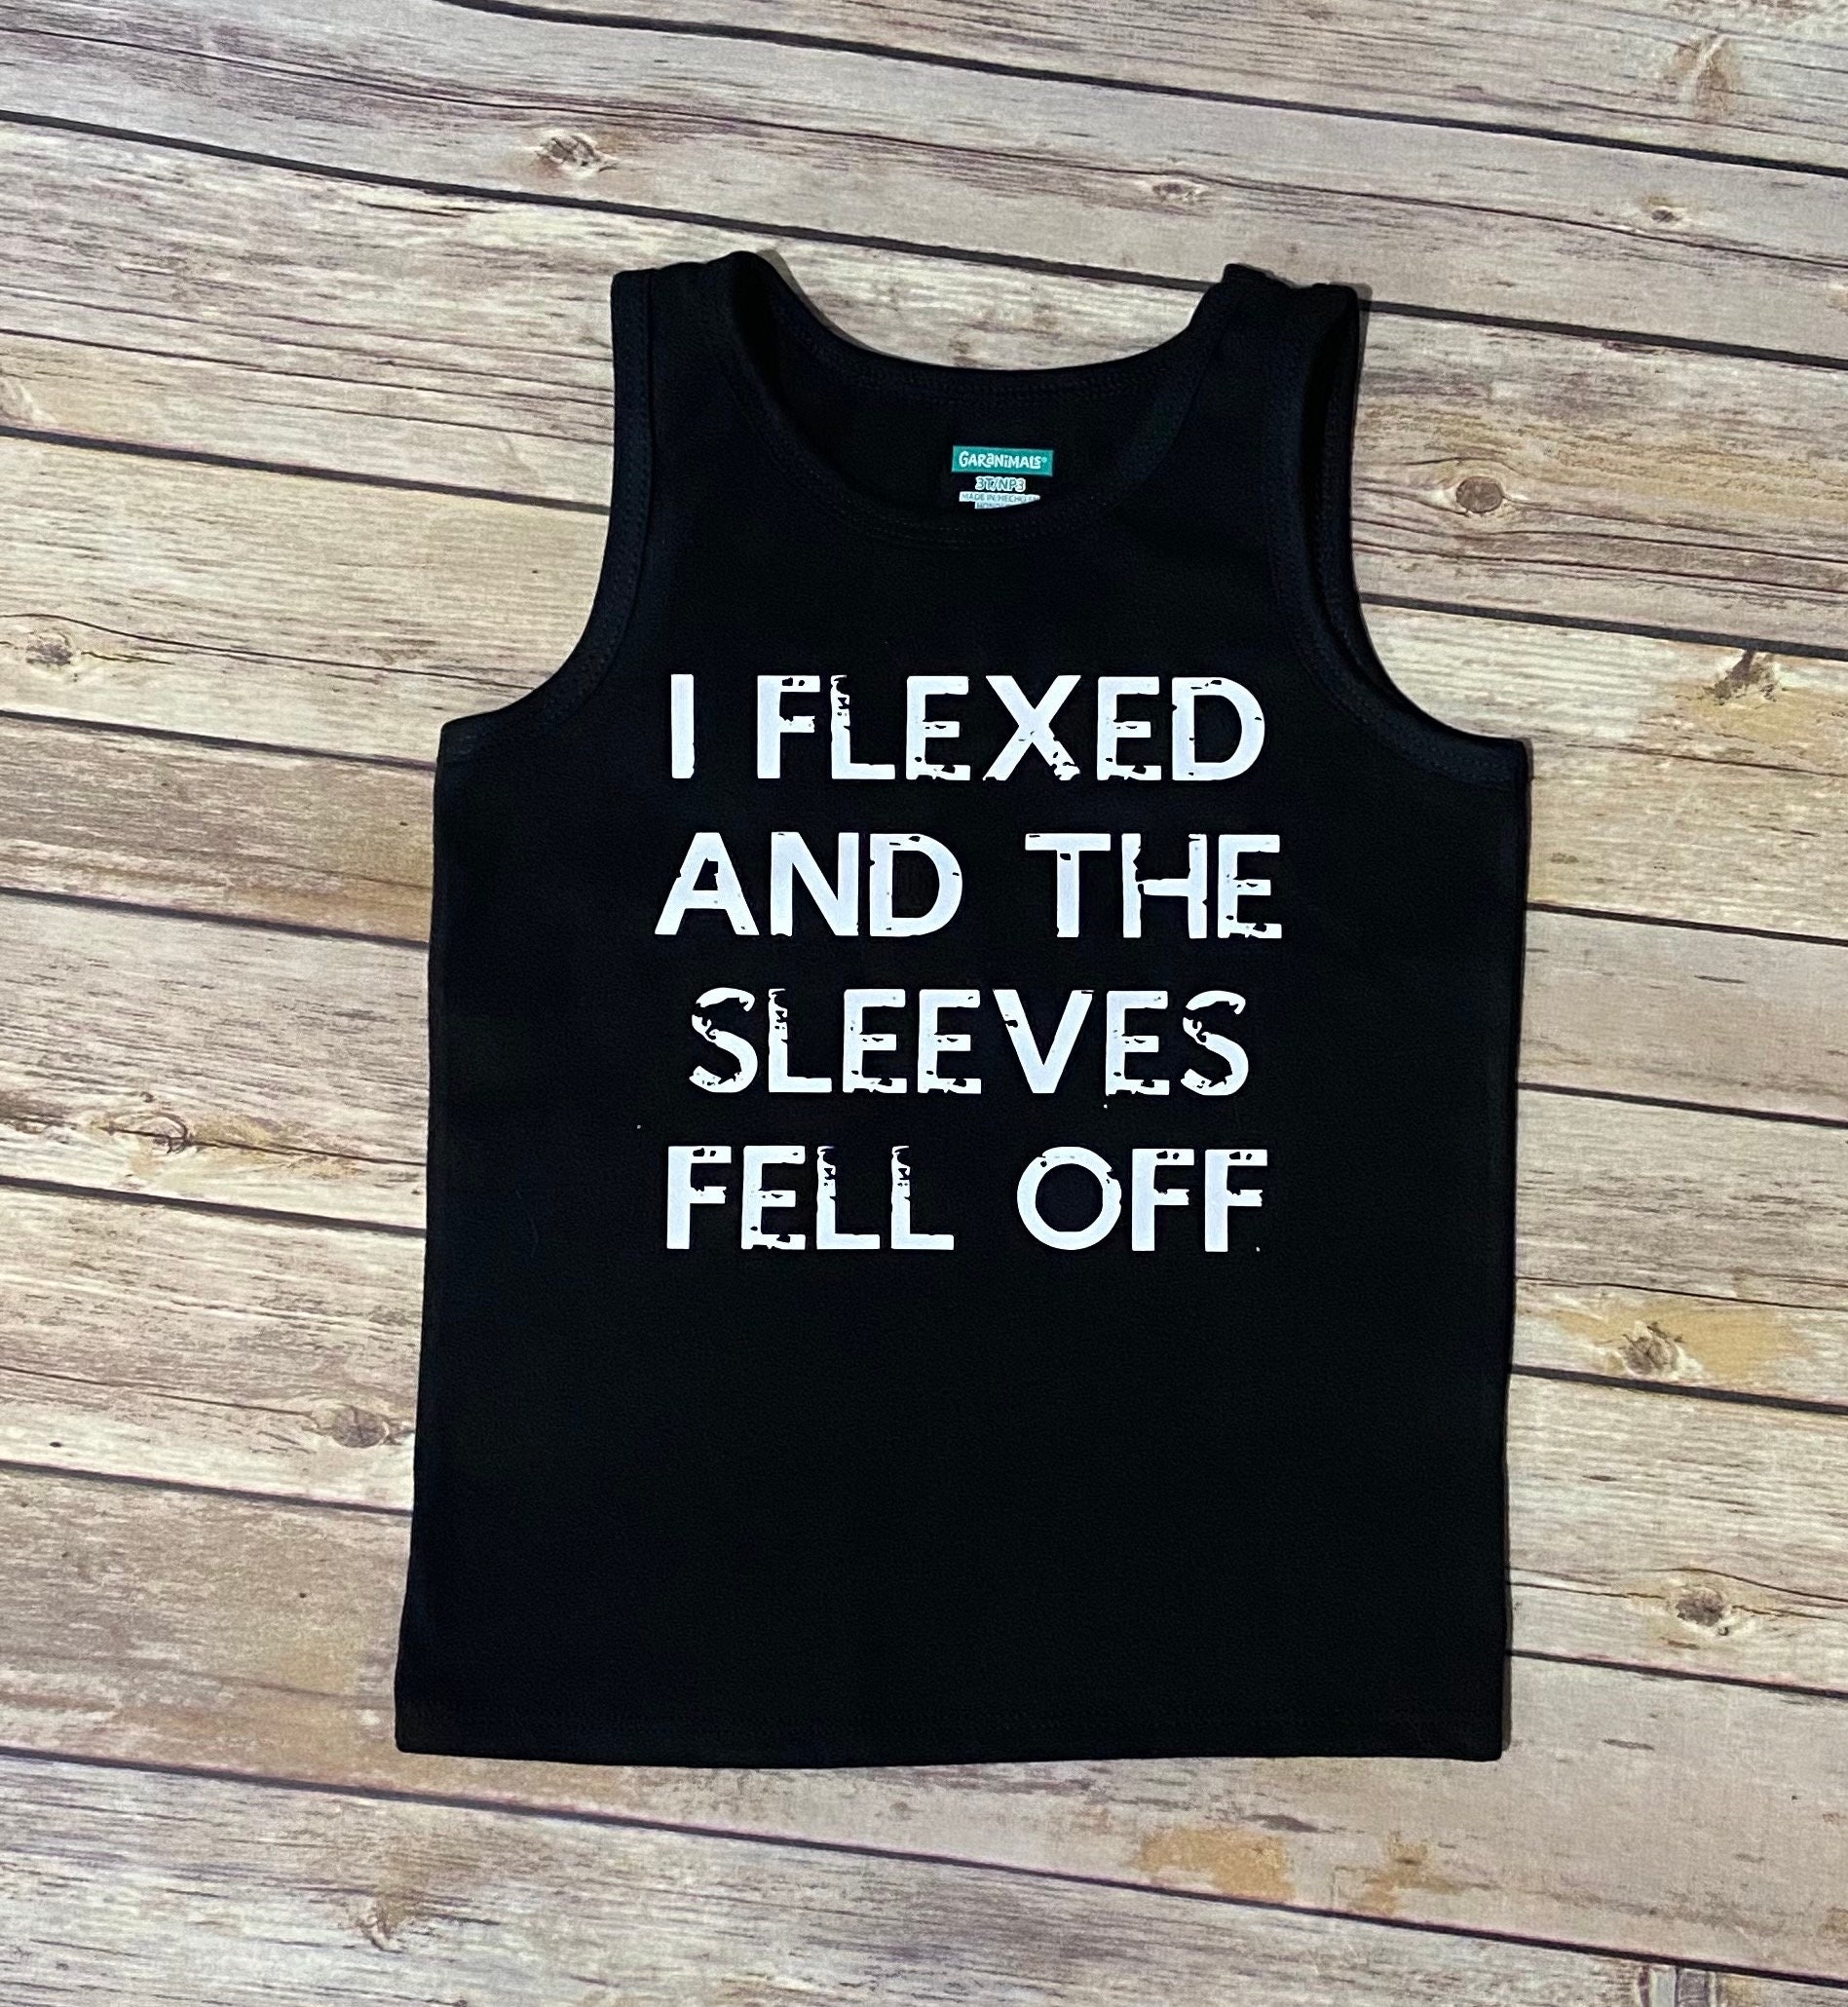 NEW I FLEXED AND THE SLEEVES FELL OFF Black Sleeveless T-shirt Muscle Tank 